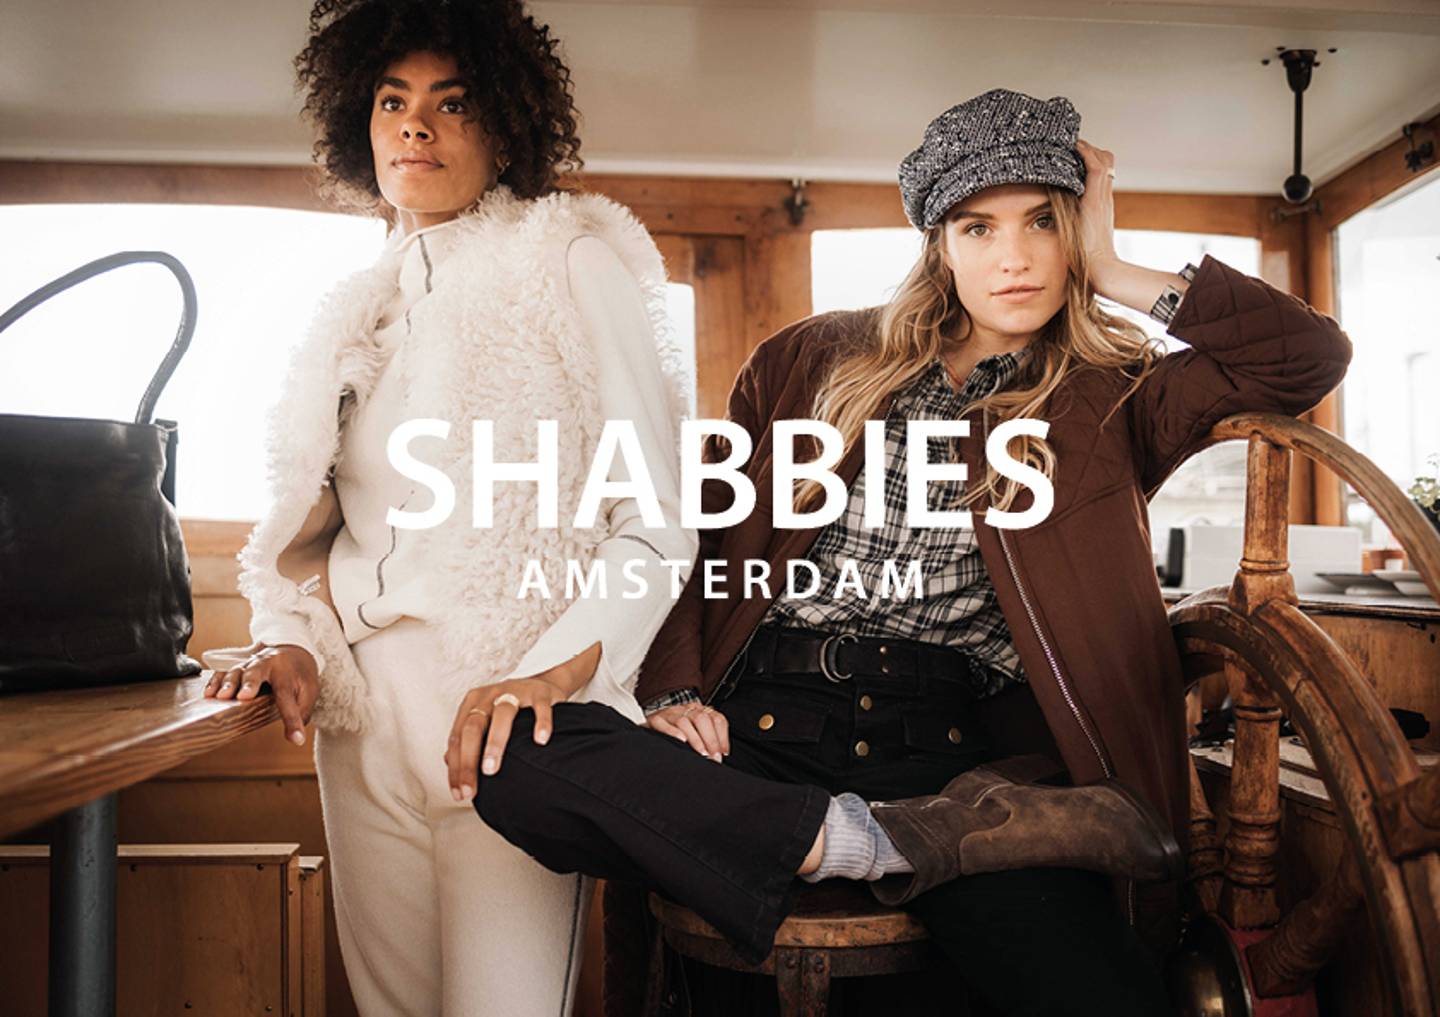 Shabbies Amsterdam Collection FW21